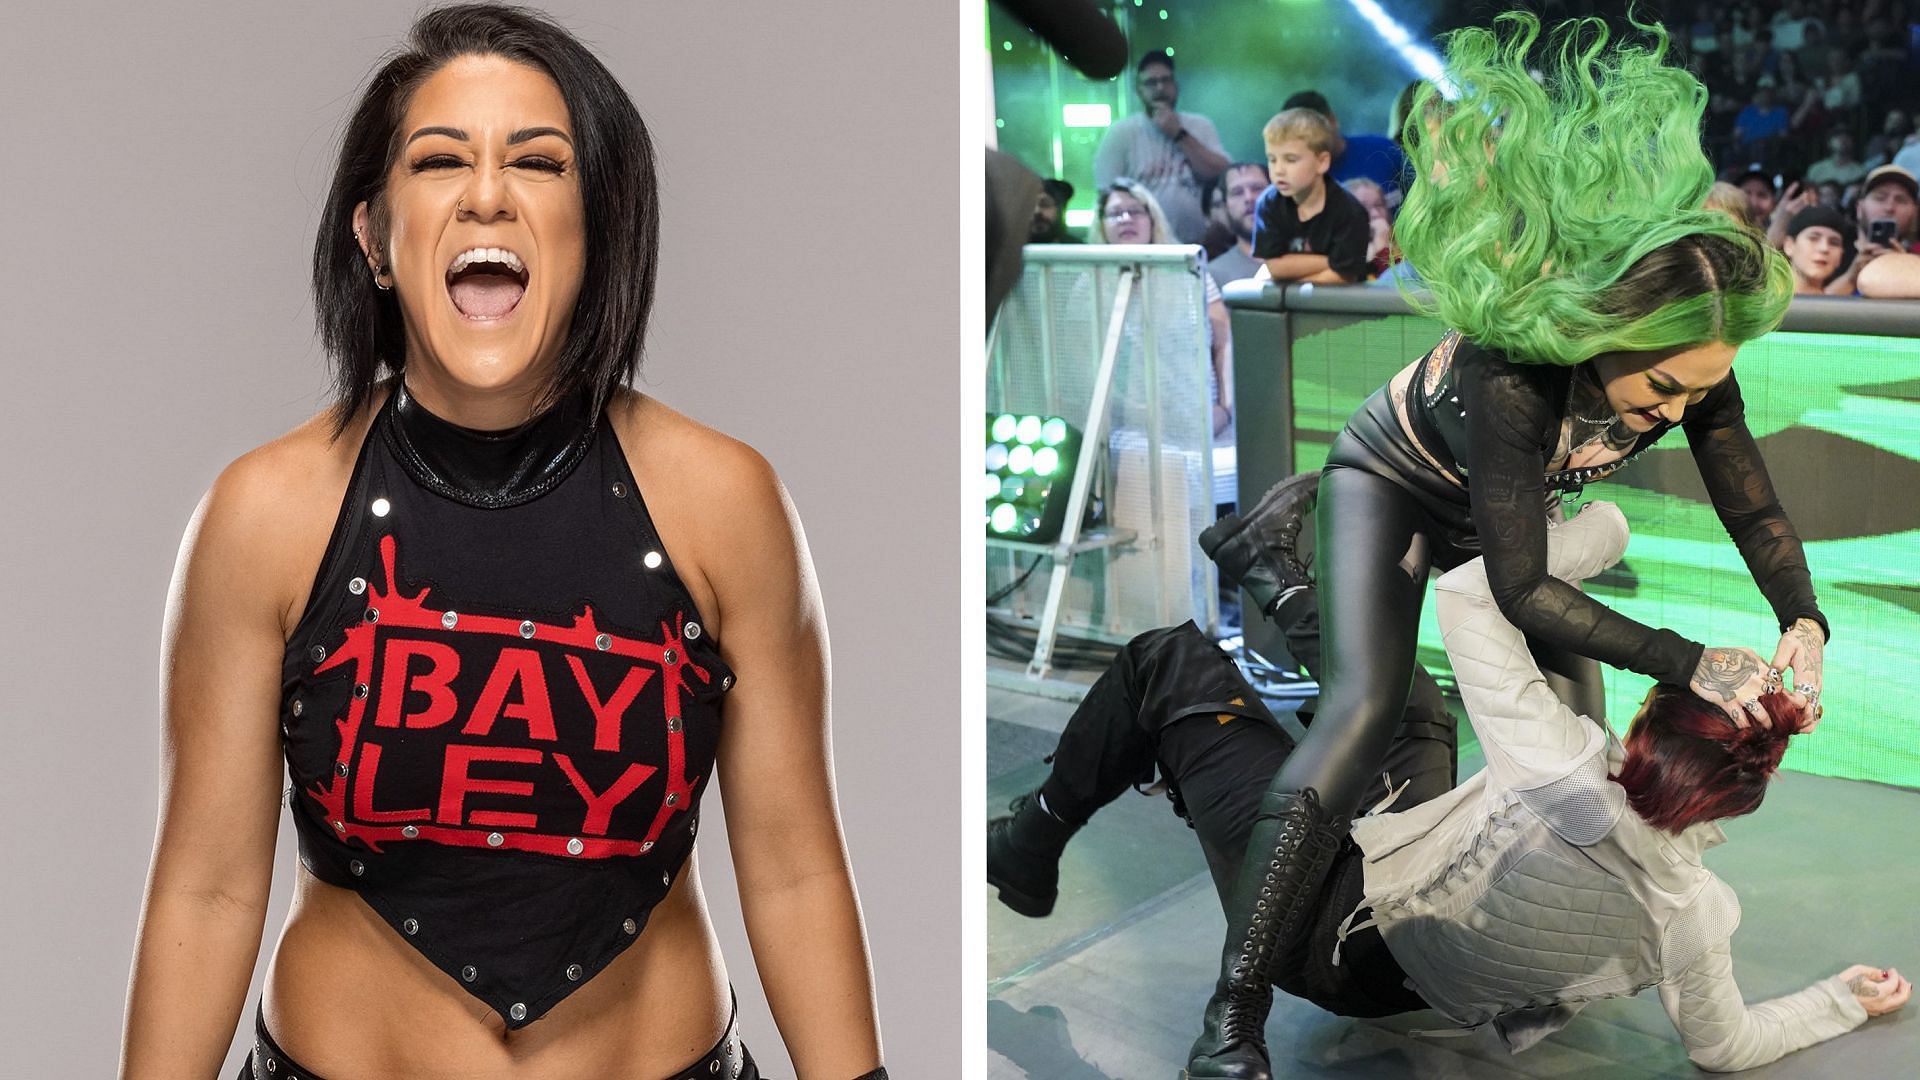 Bayley and Shotzi are set to go one-on-one on WWE SmackDown